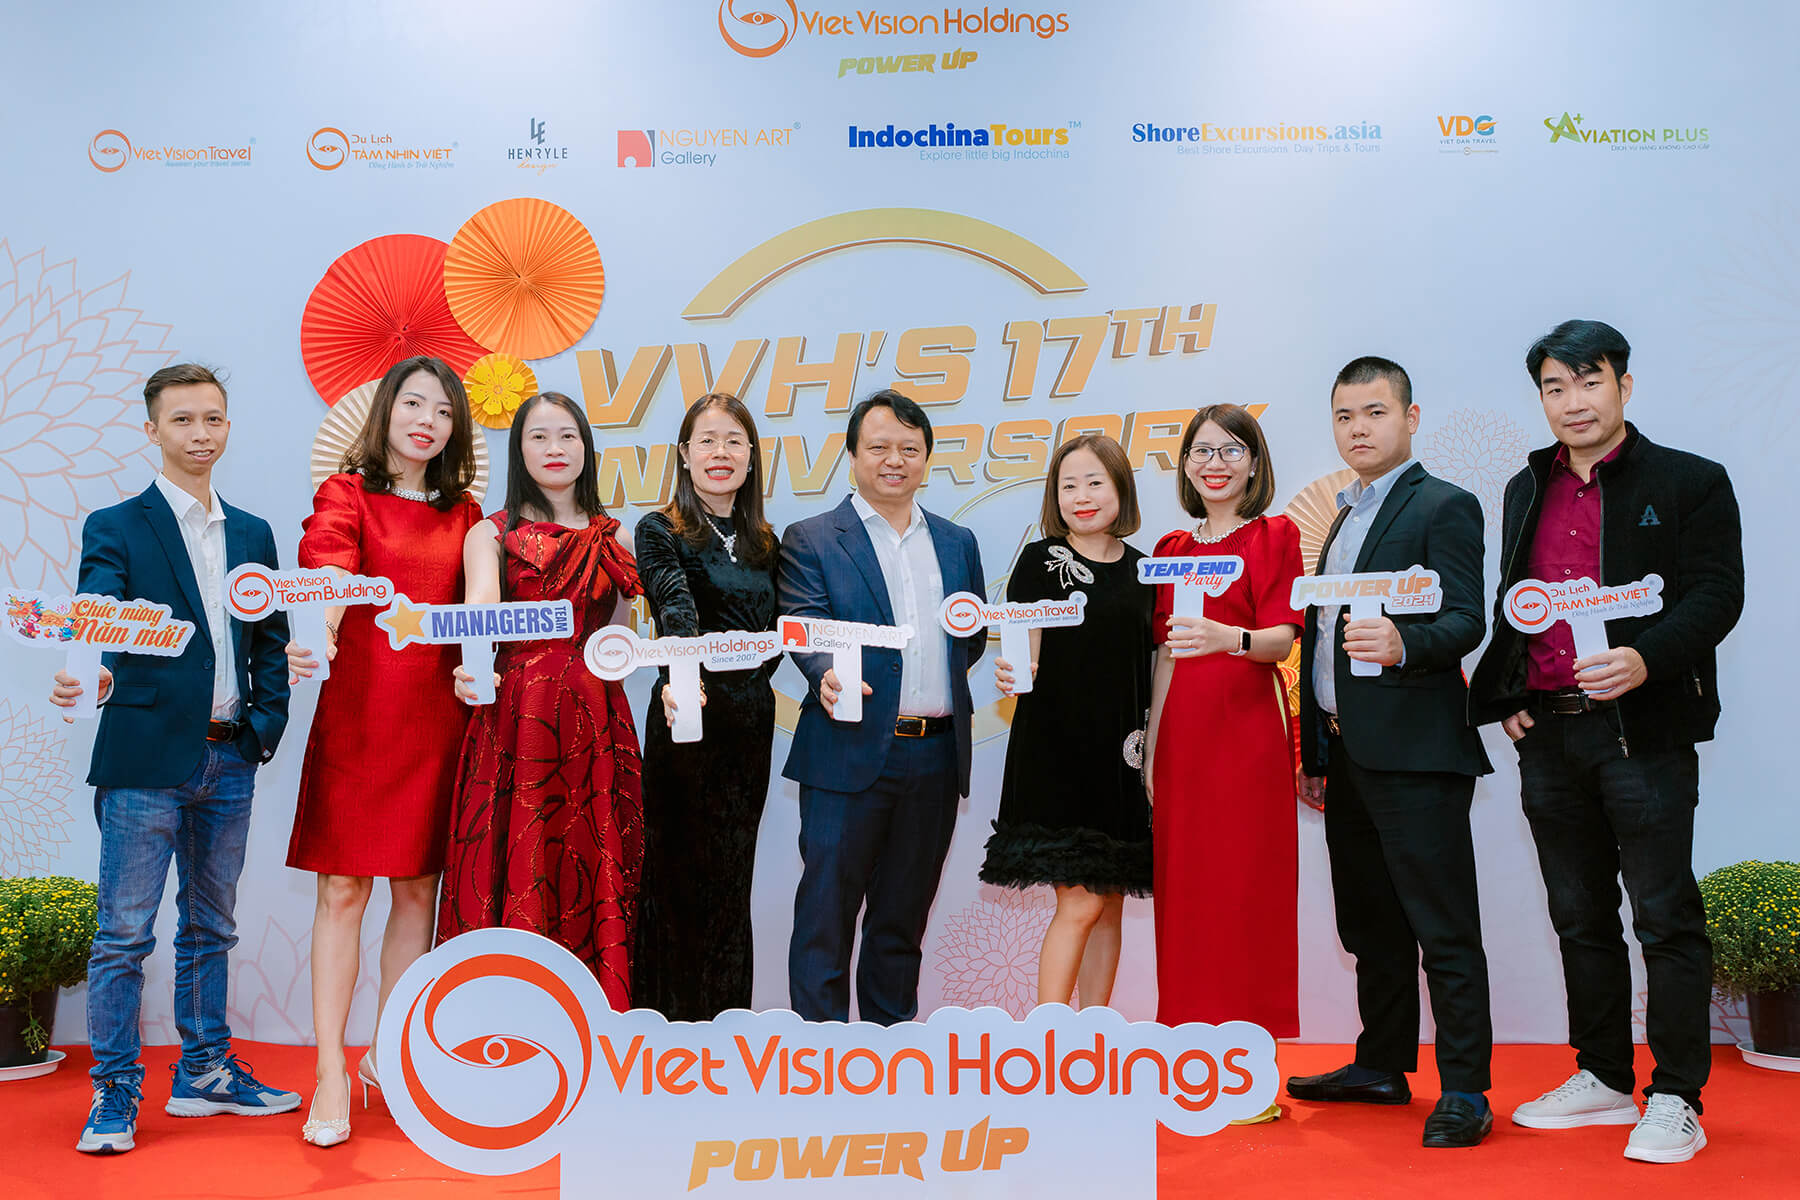 About Viet Vision Travel